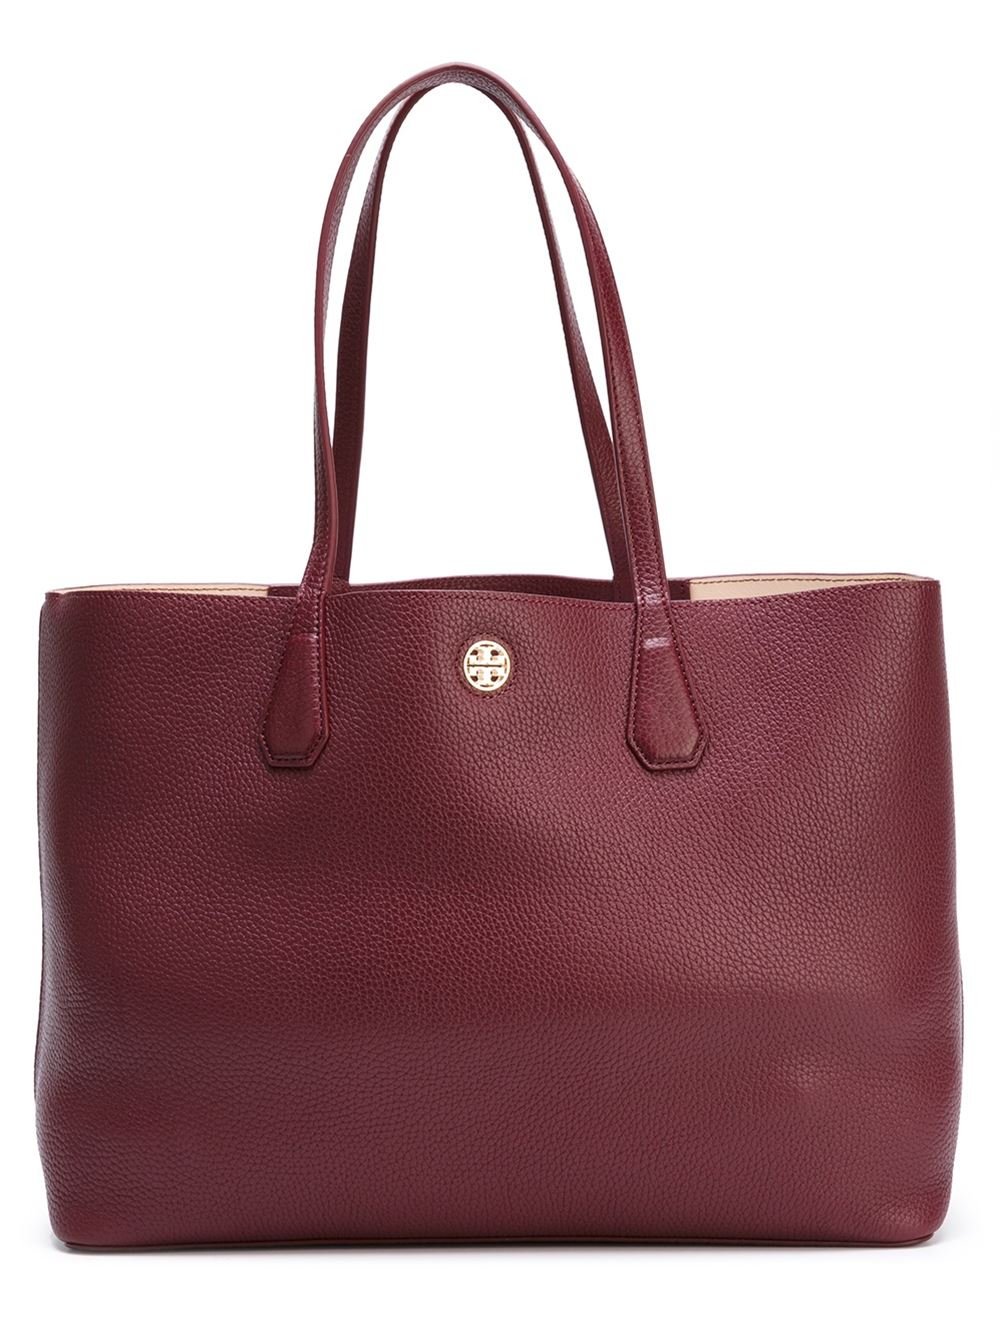 Tory burch 'perry' Tote in Purple (red) | Lyst